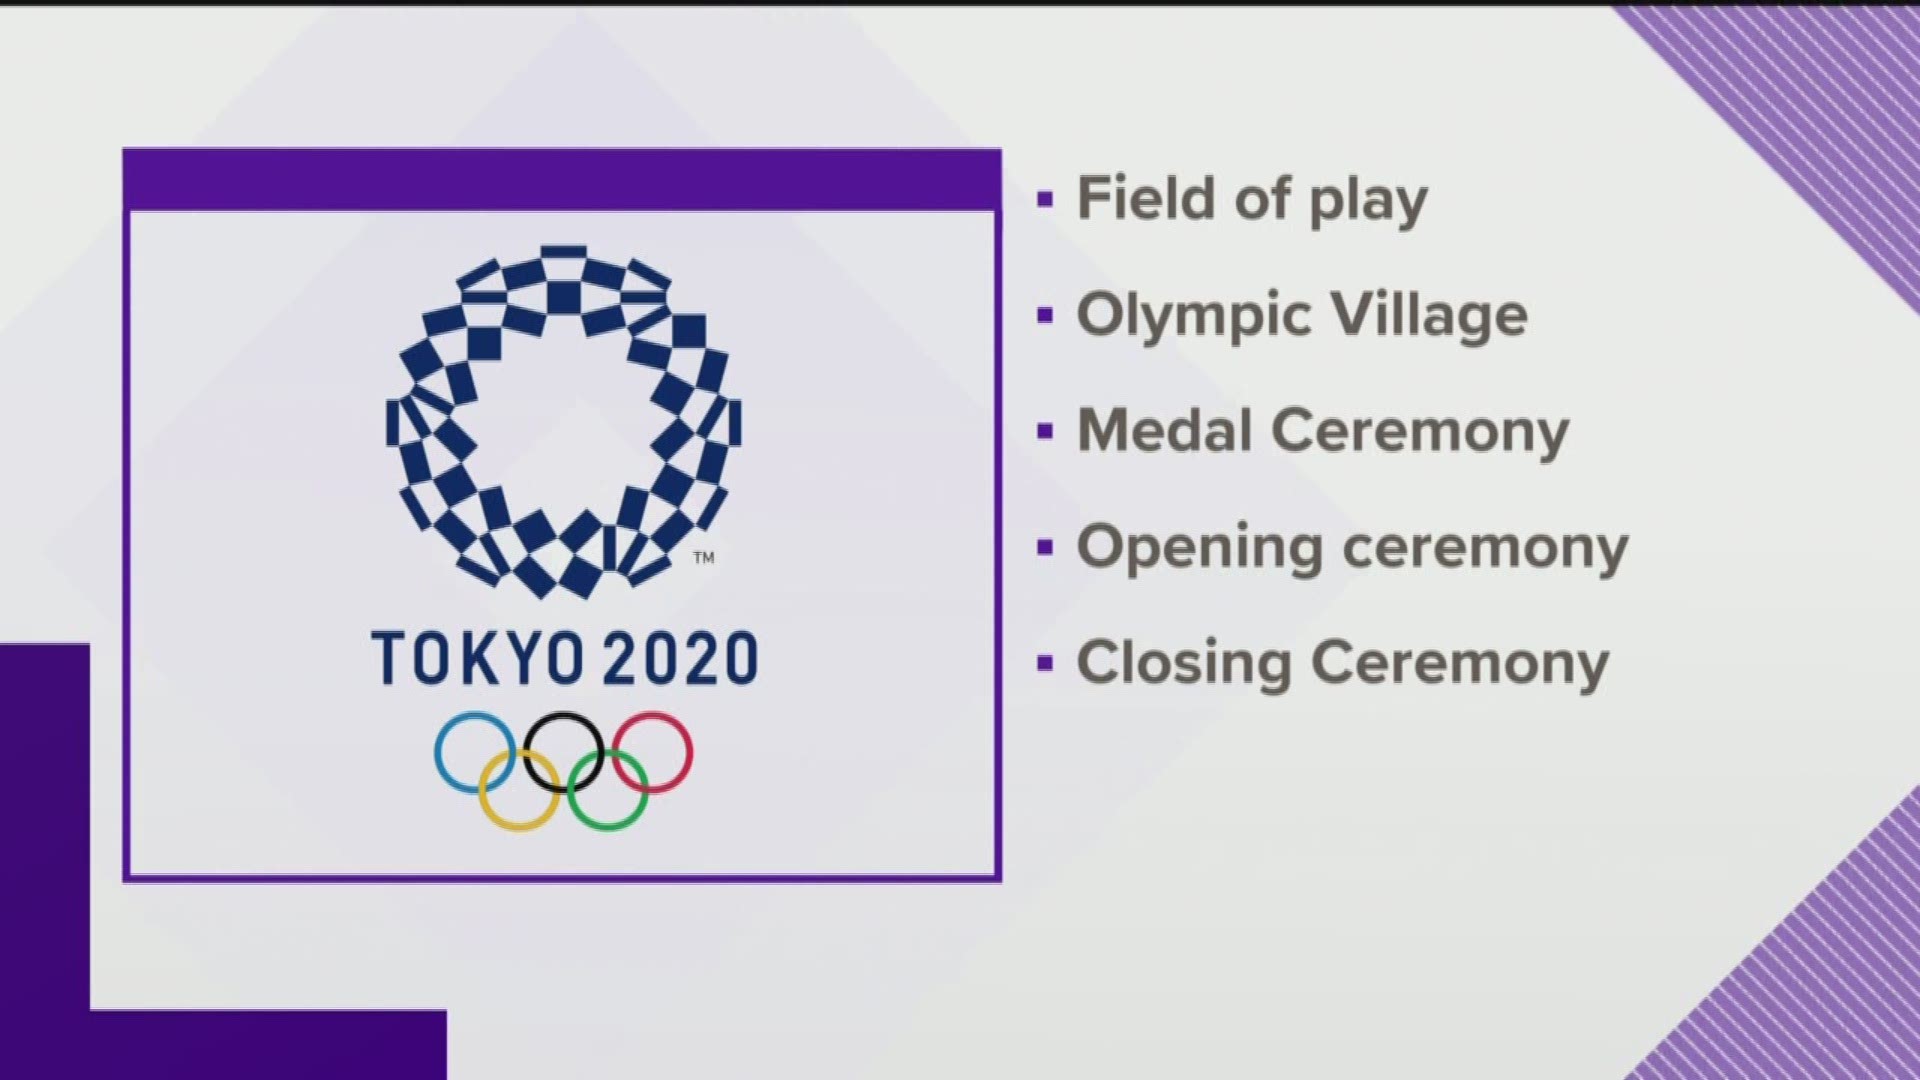 Athletes are prohibited by the Olympic Charter's Rule 50 from taking a political stand in the field of play.